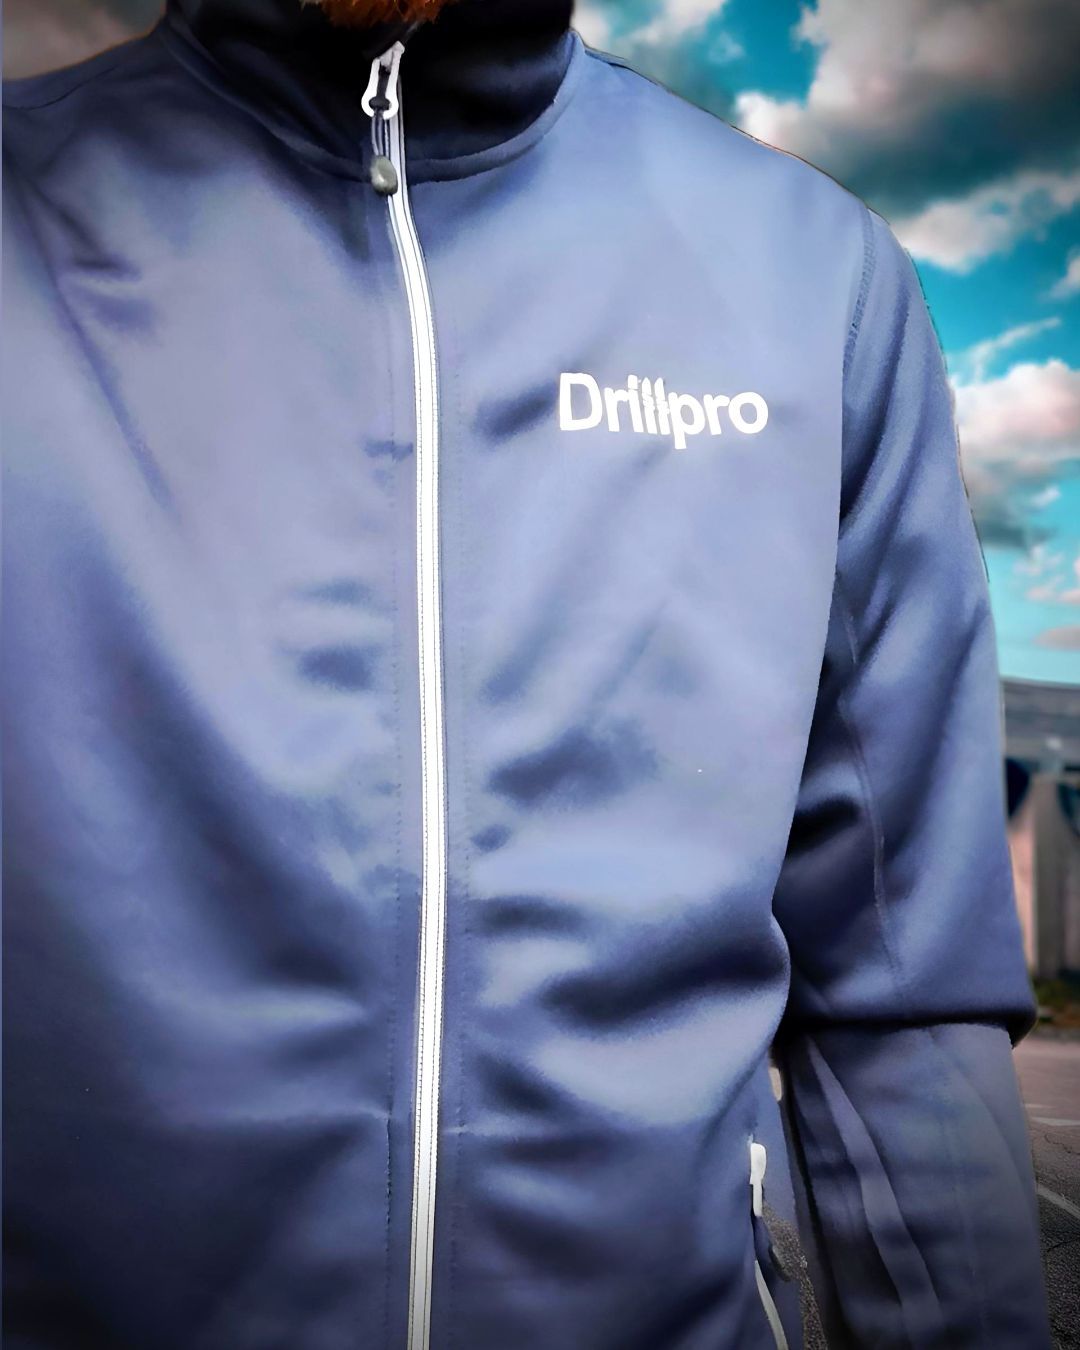 A man wearing a blue jacket with the word drillpro on it